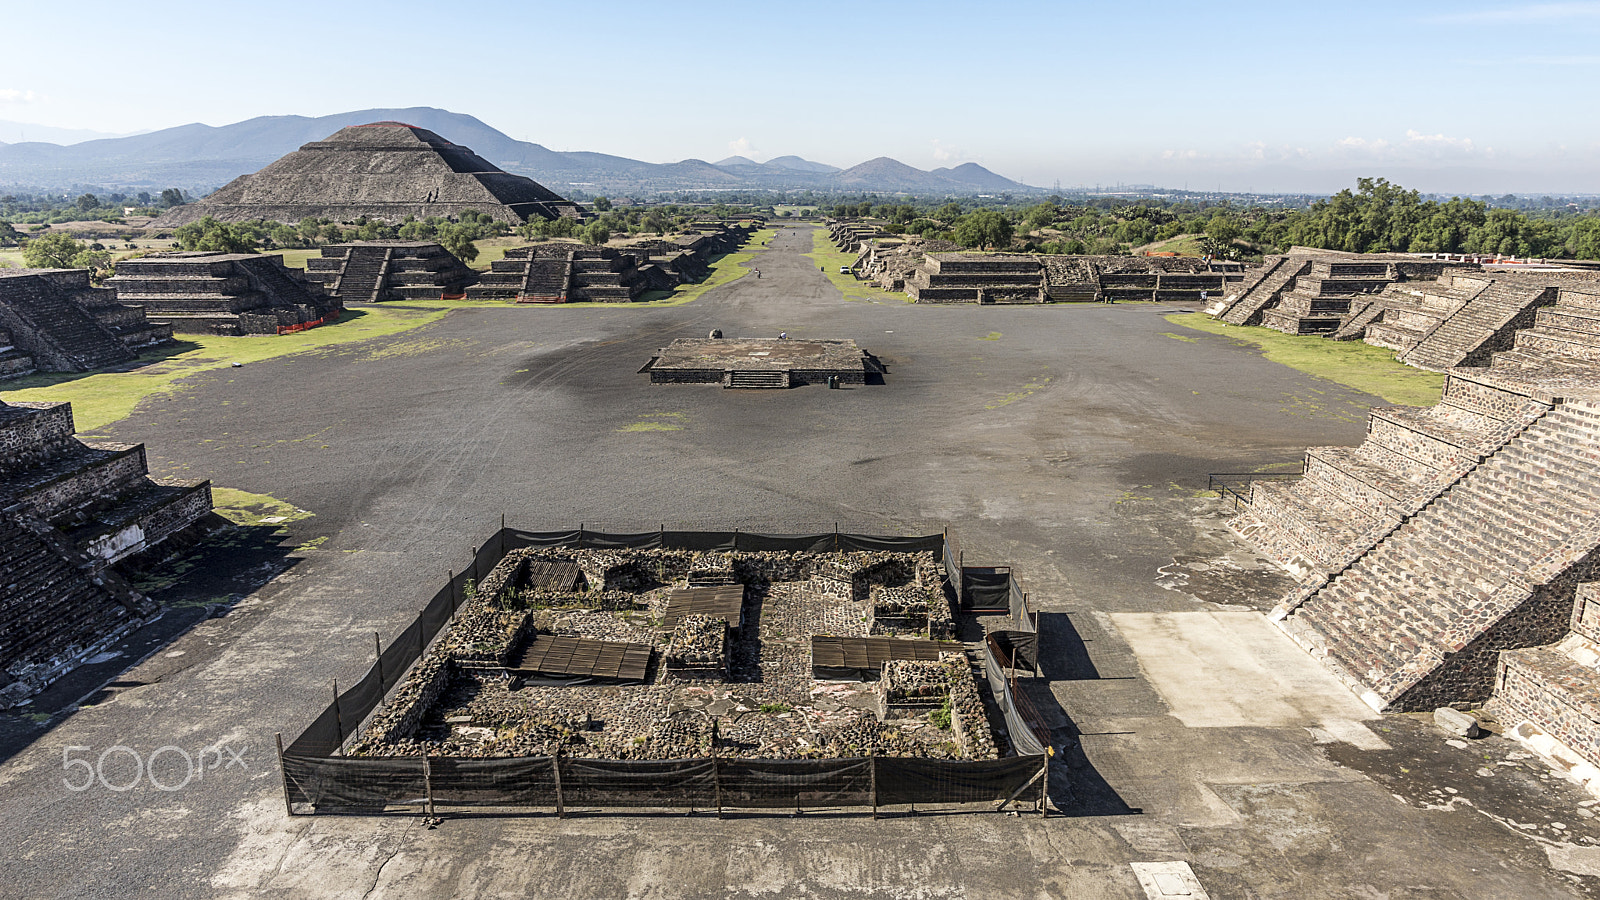 Sony a7 sample photo. Teotihuacan photography